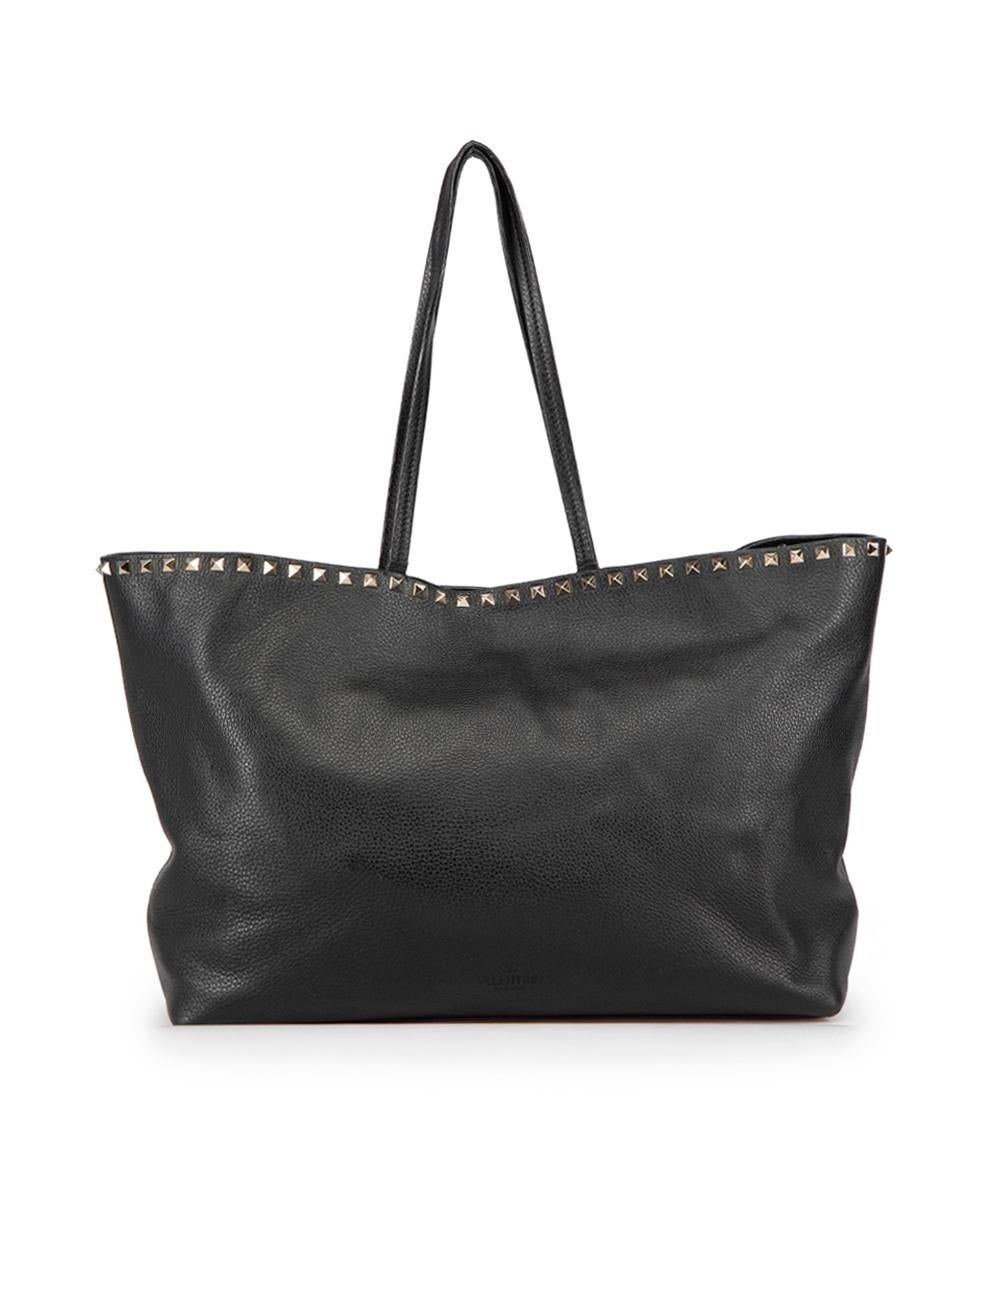 Valentino Black Leather Rockstud Tote Bag In Good Condition For Sale In London, GB